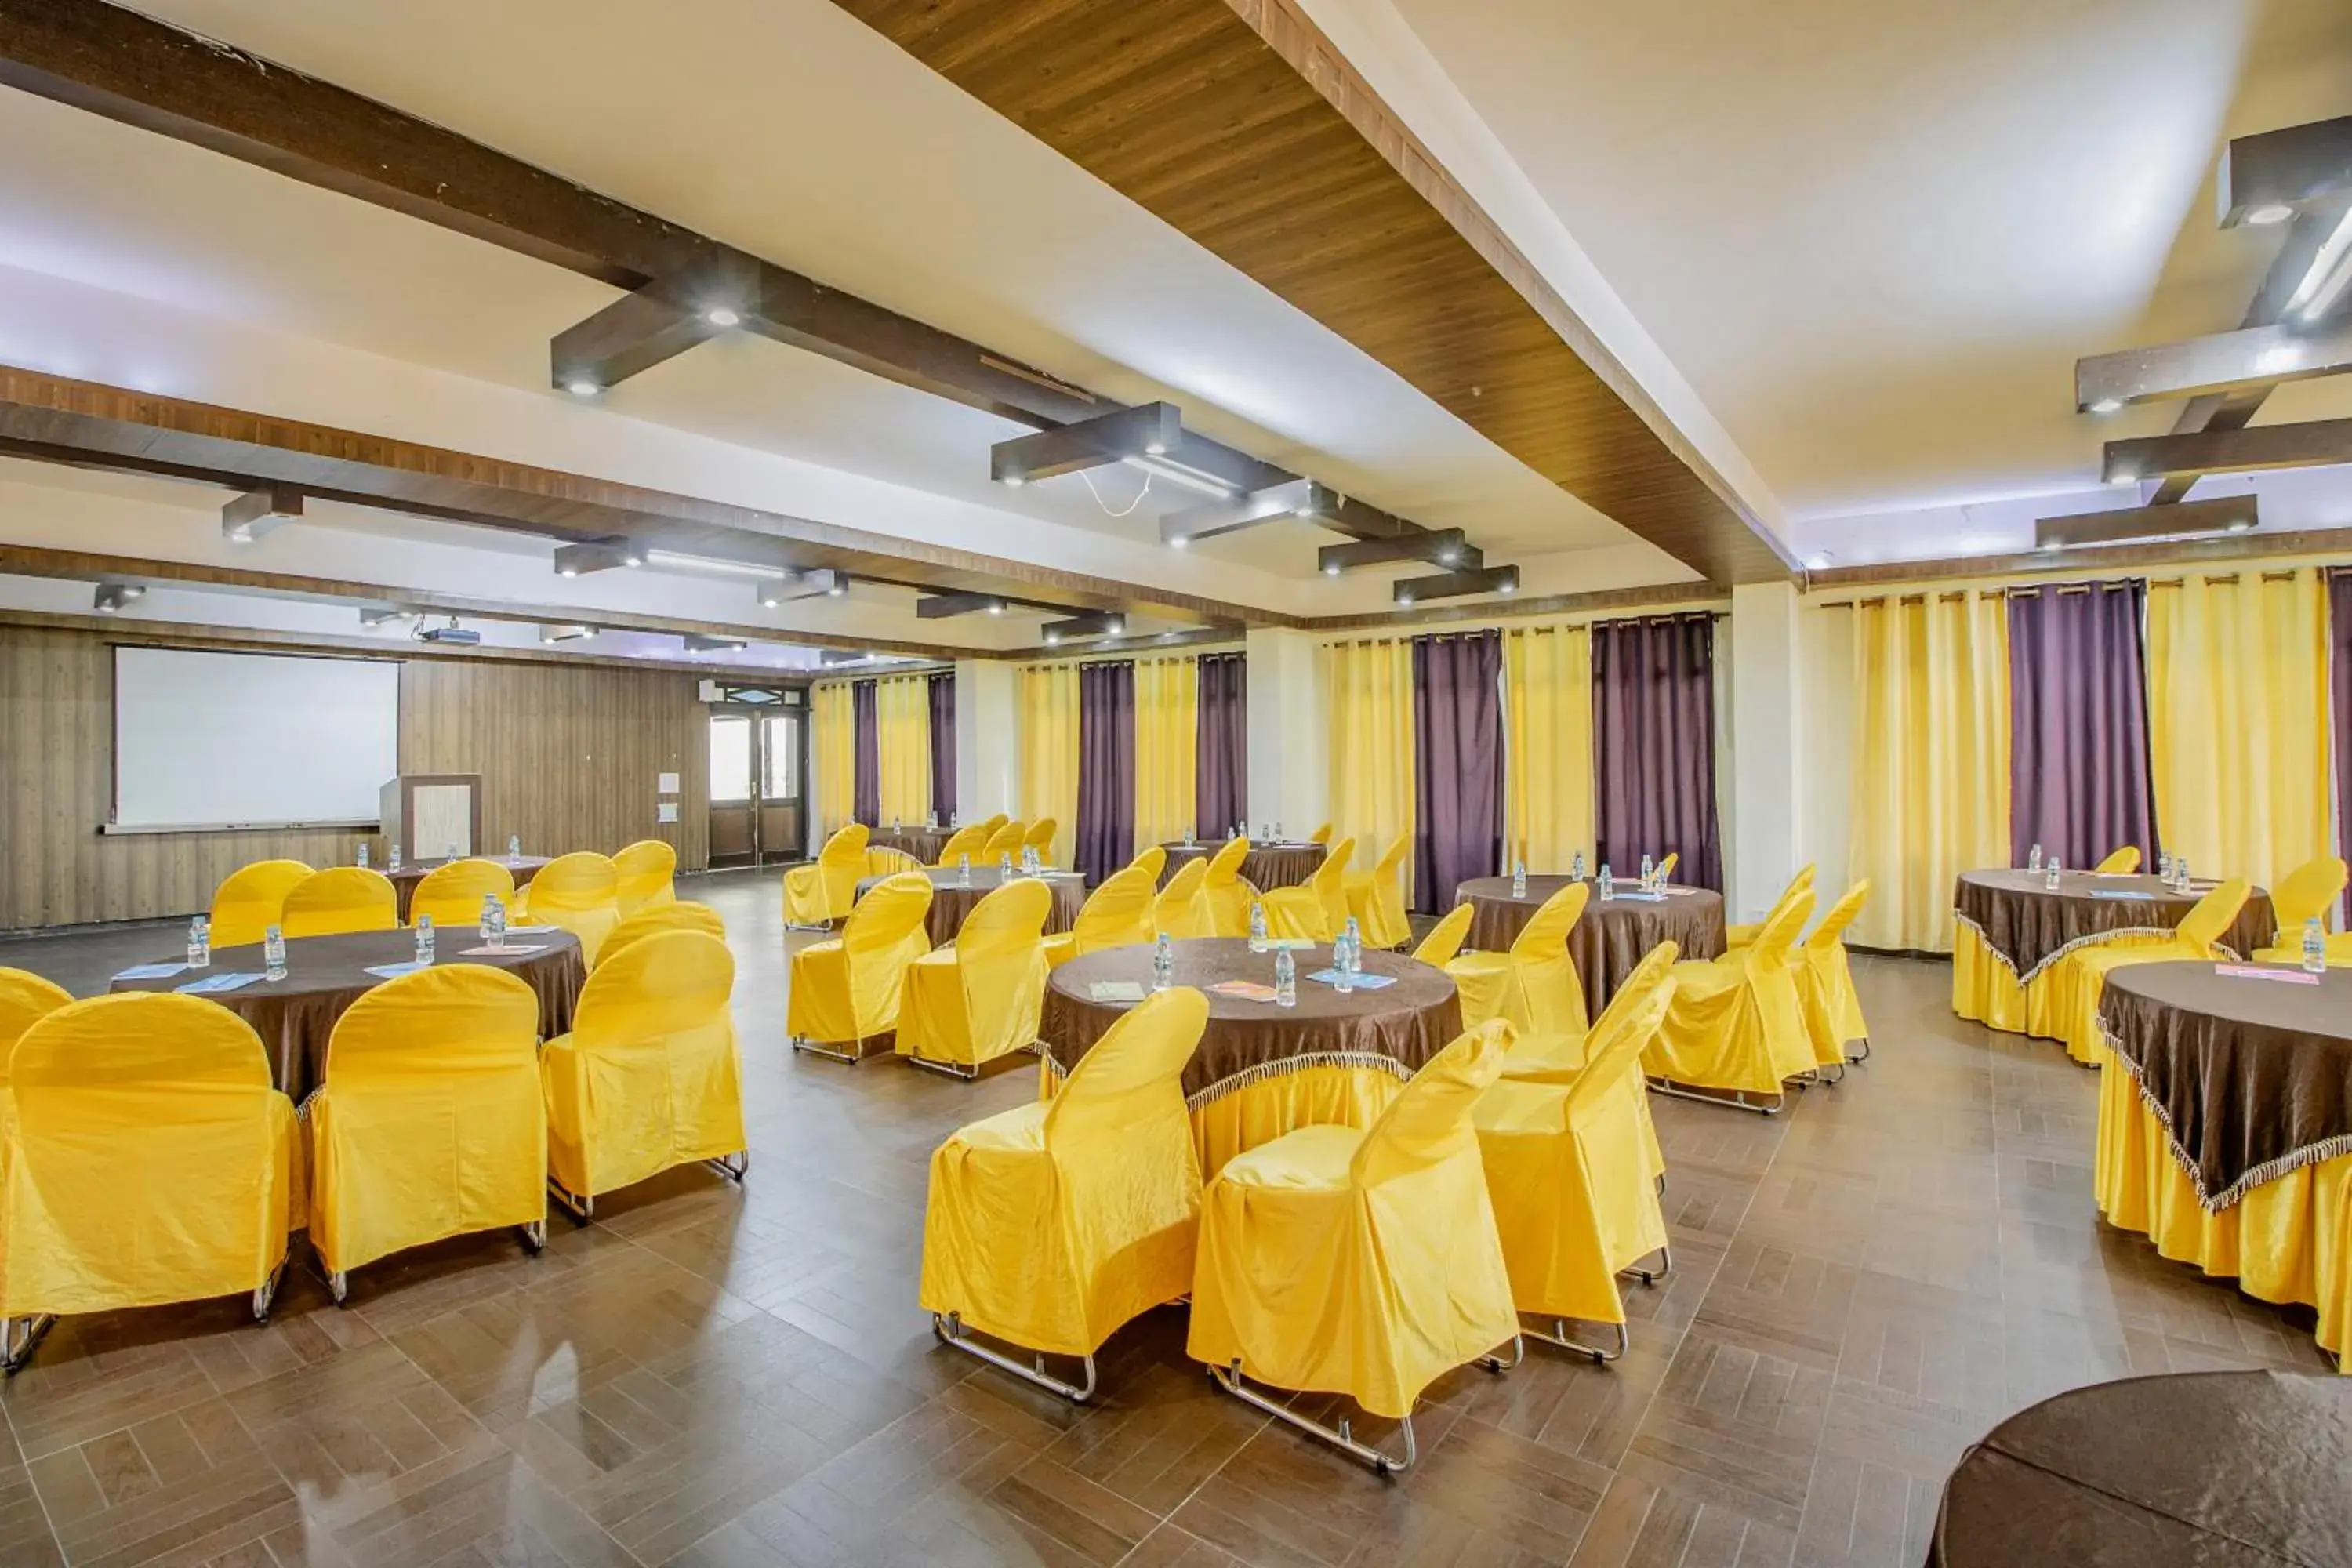 Meeting/conference room, Banquet Facilities in Snow Valley Resort